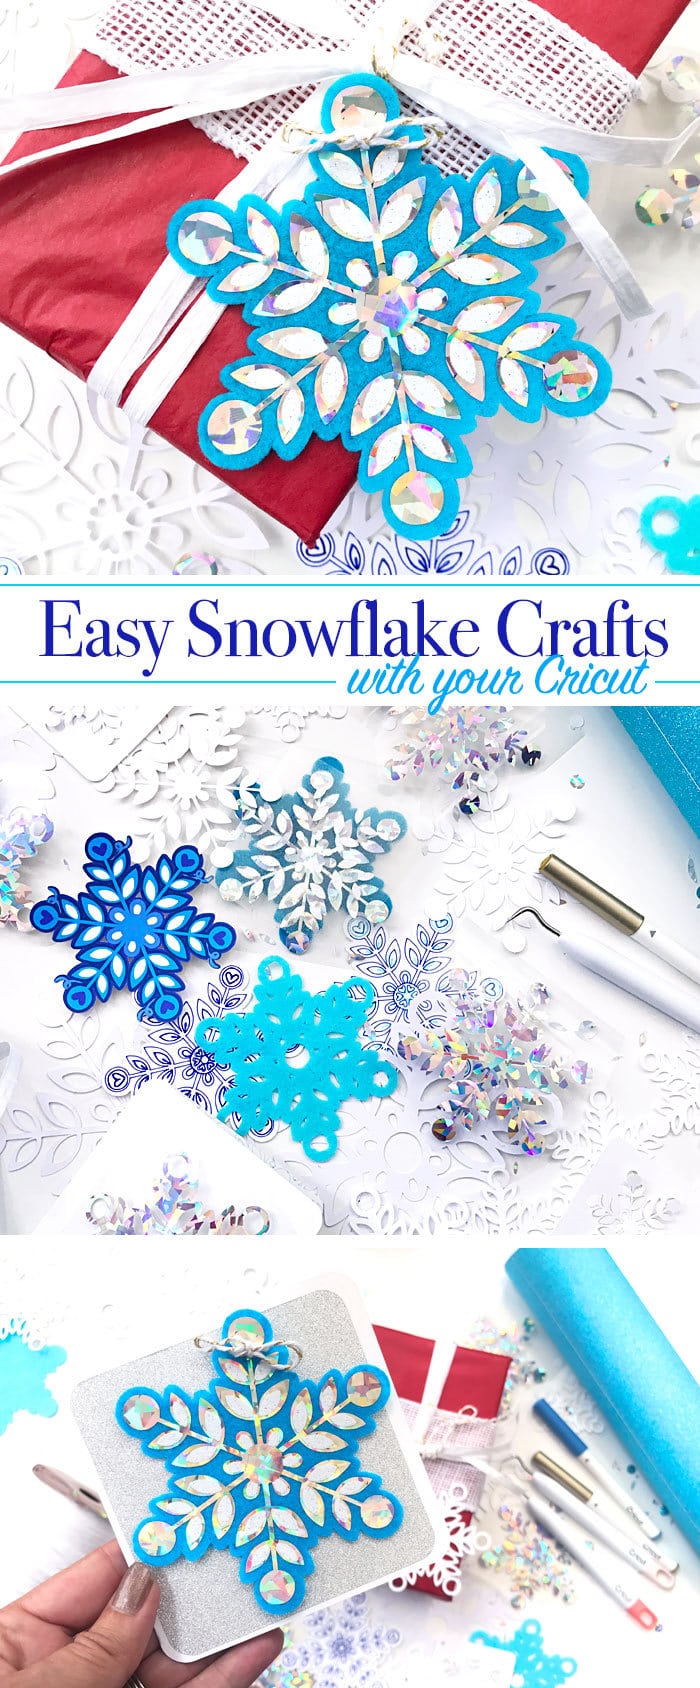 Easy Snowflake Crafts and SVG cut file by Jen Goode